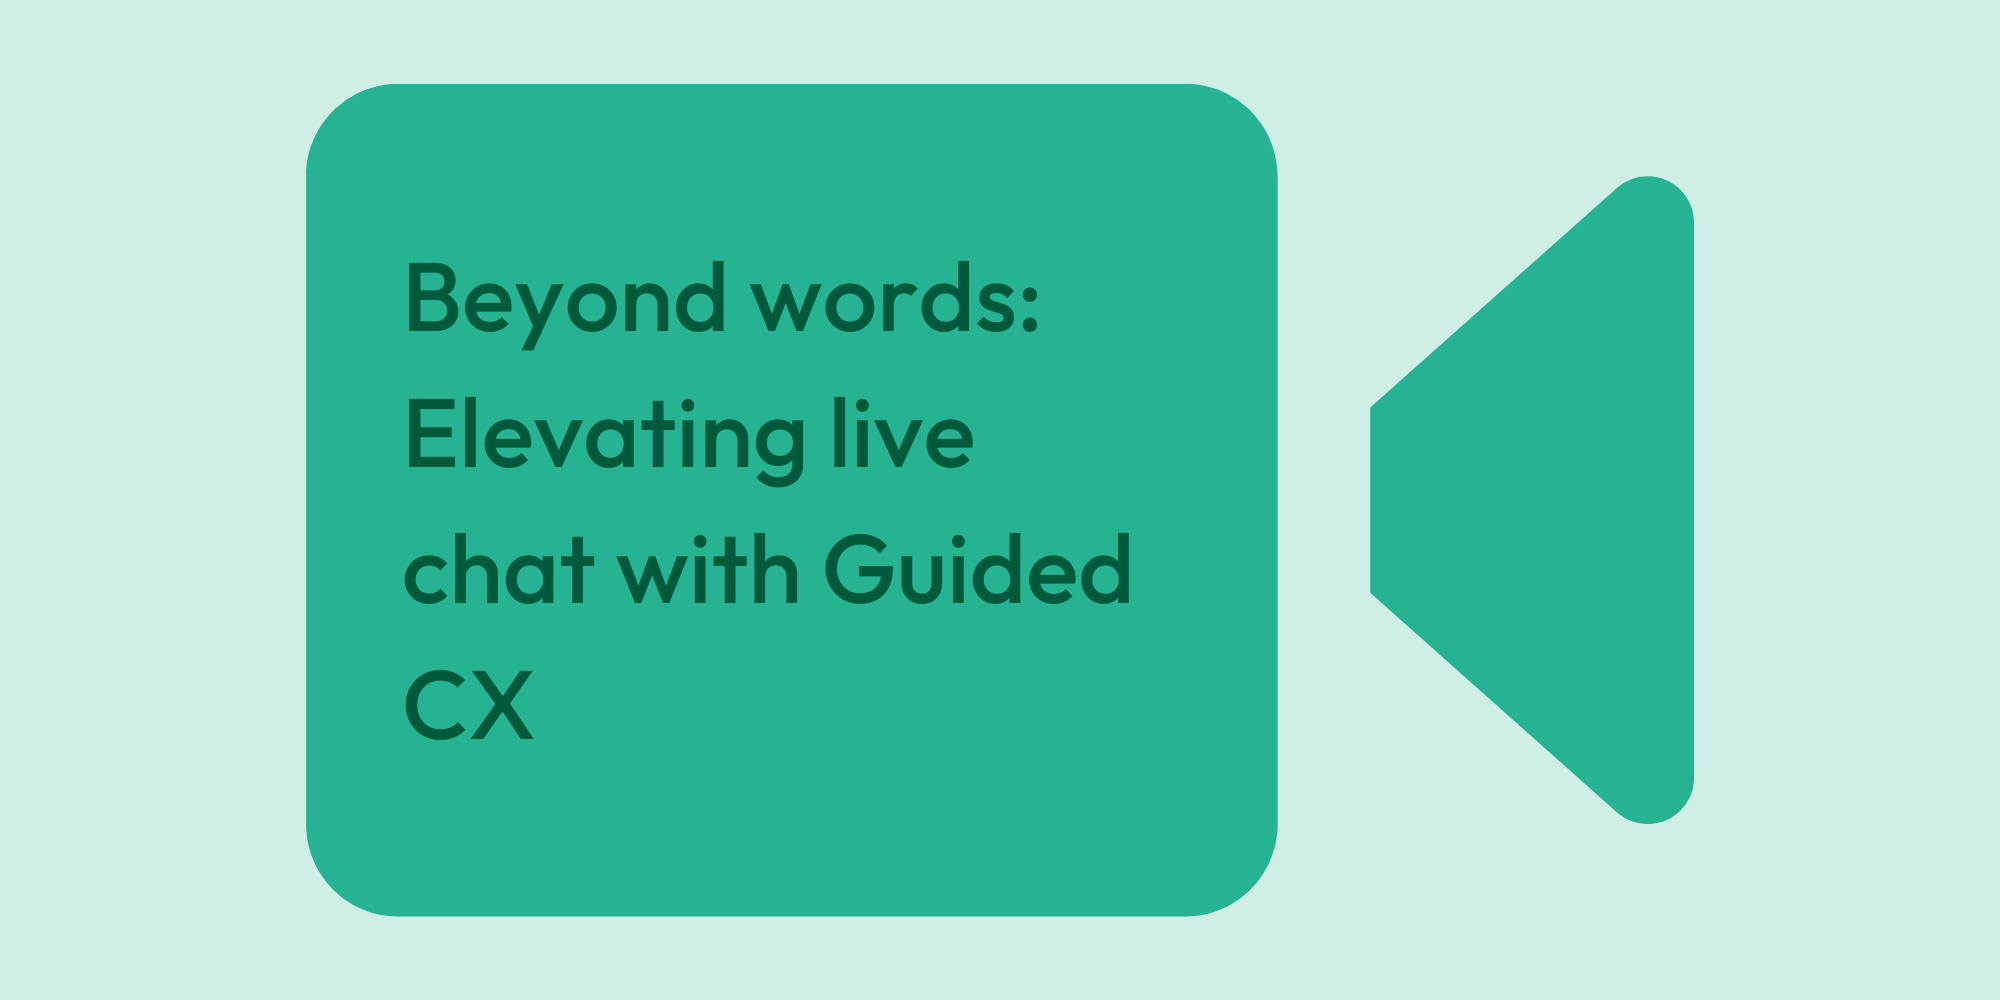 Beyond words Elevating live chat with Guided CX (1)